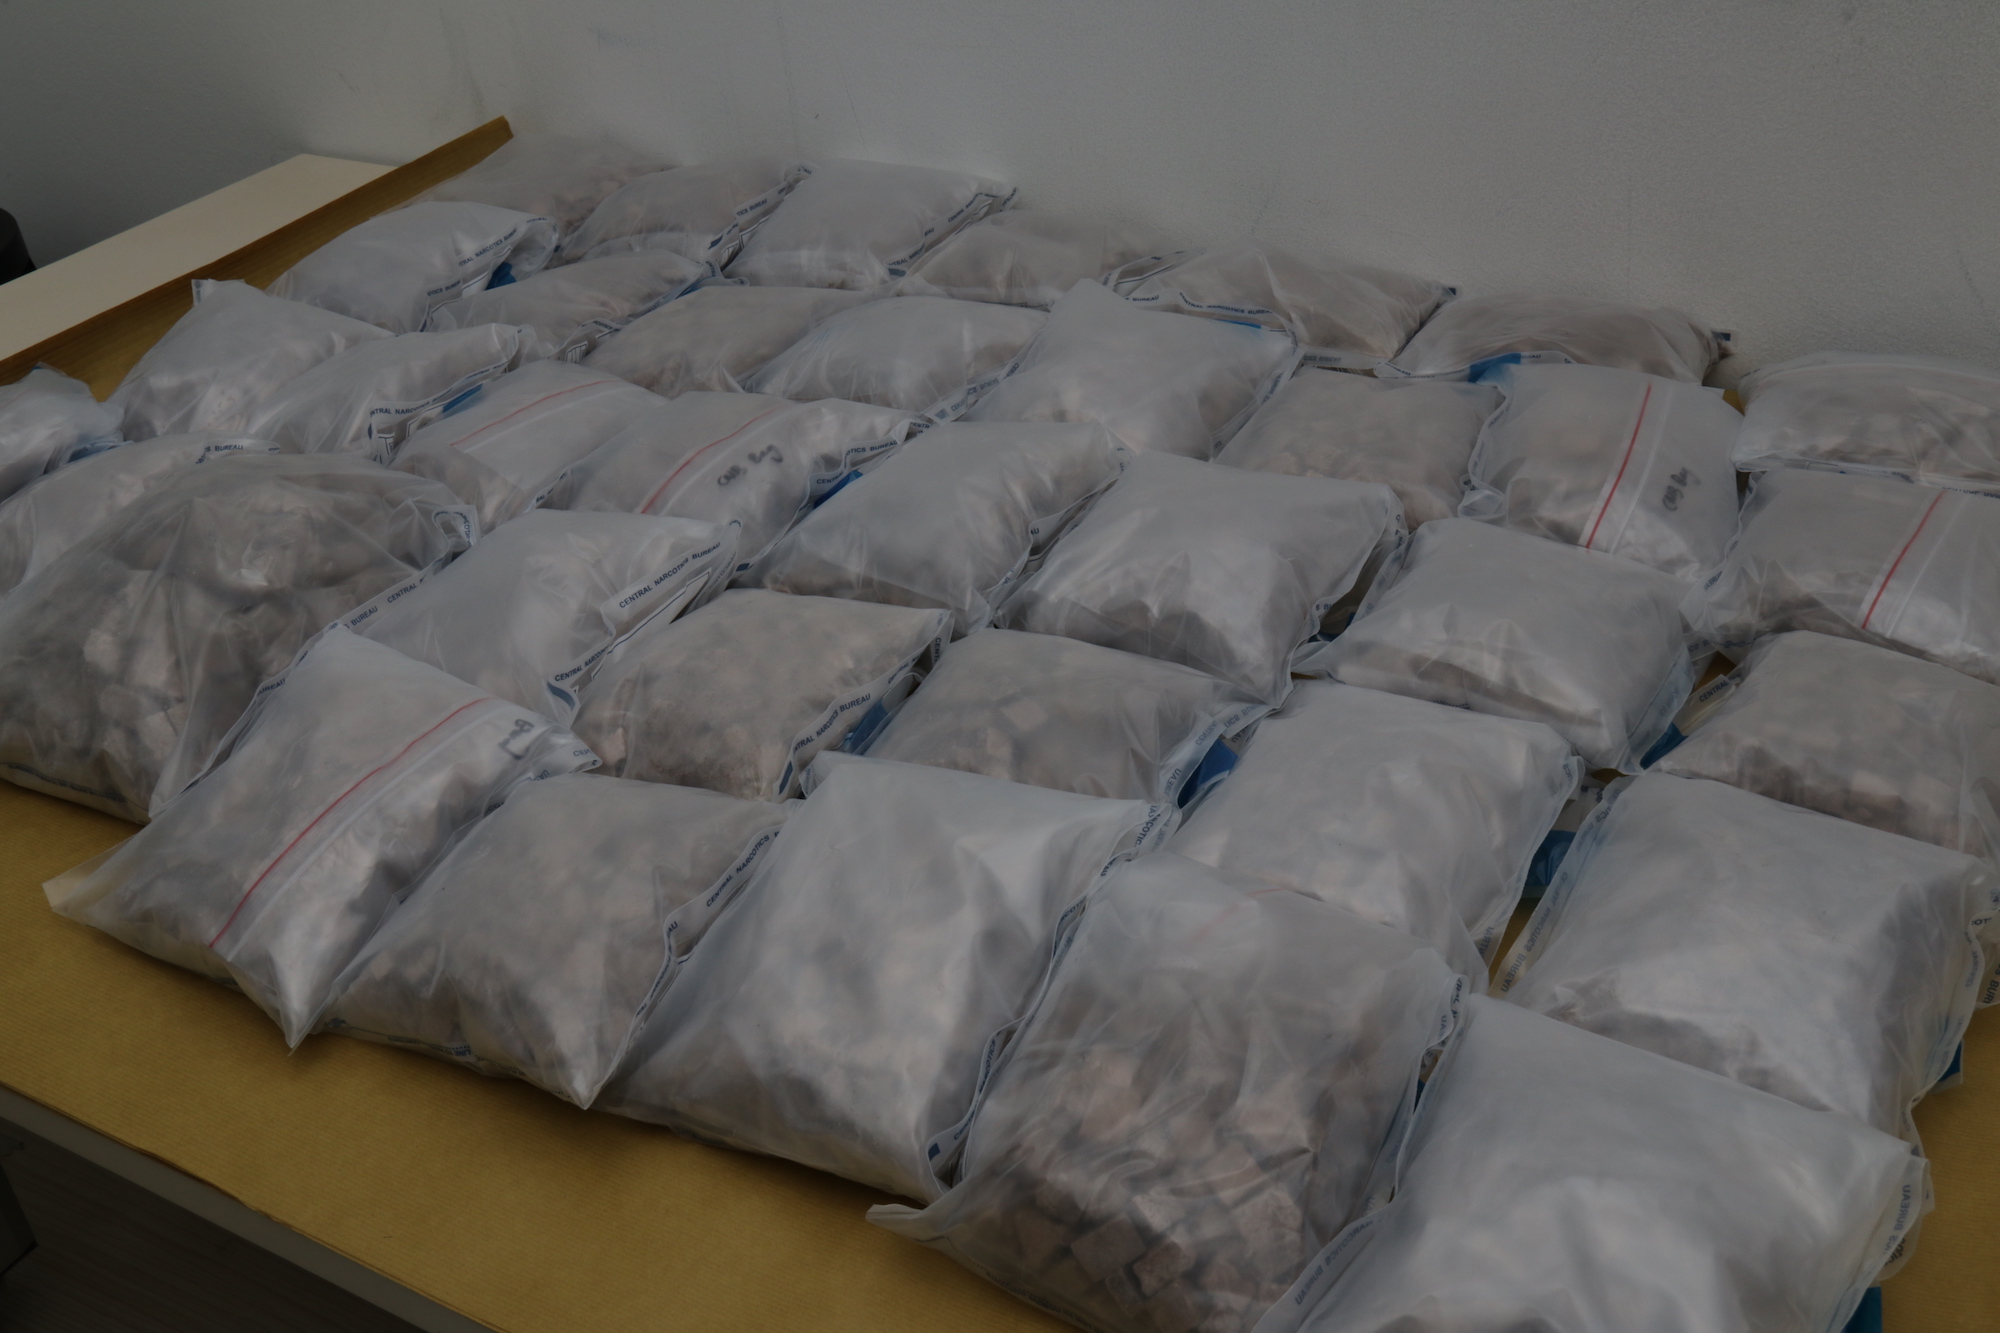 ICA CNB drug bust 20 May 2022